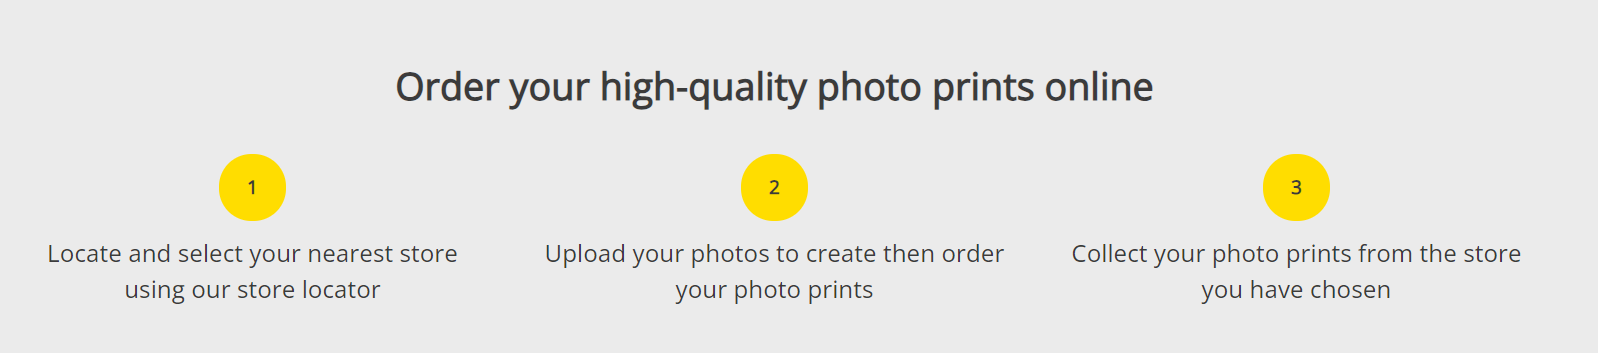 the process of ordering your high-quality photo prints online